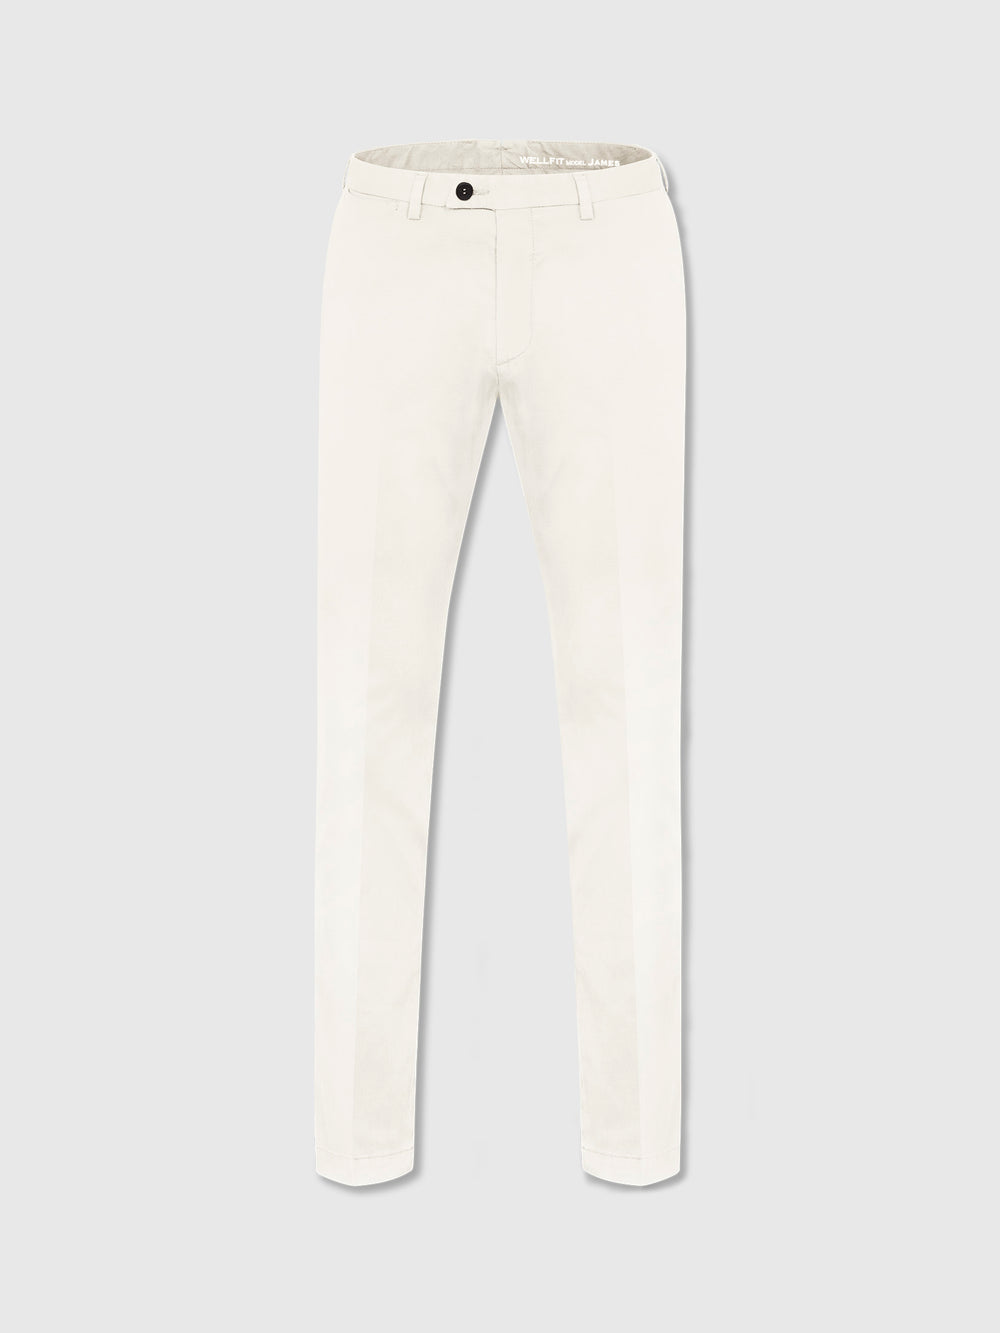 Milk Cannetté Stretchy Chino